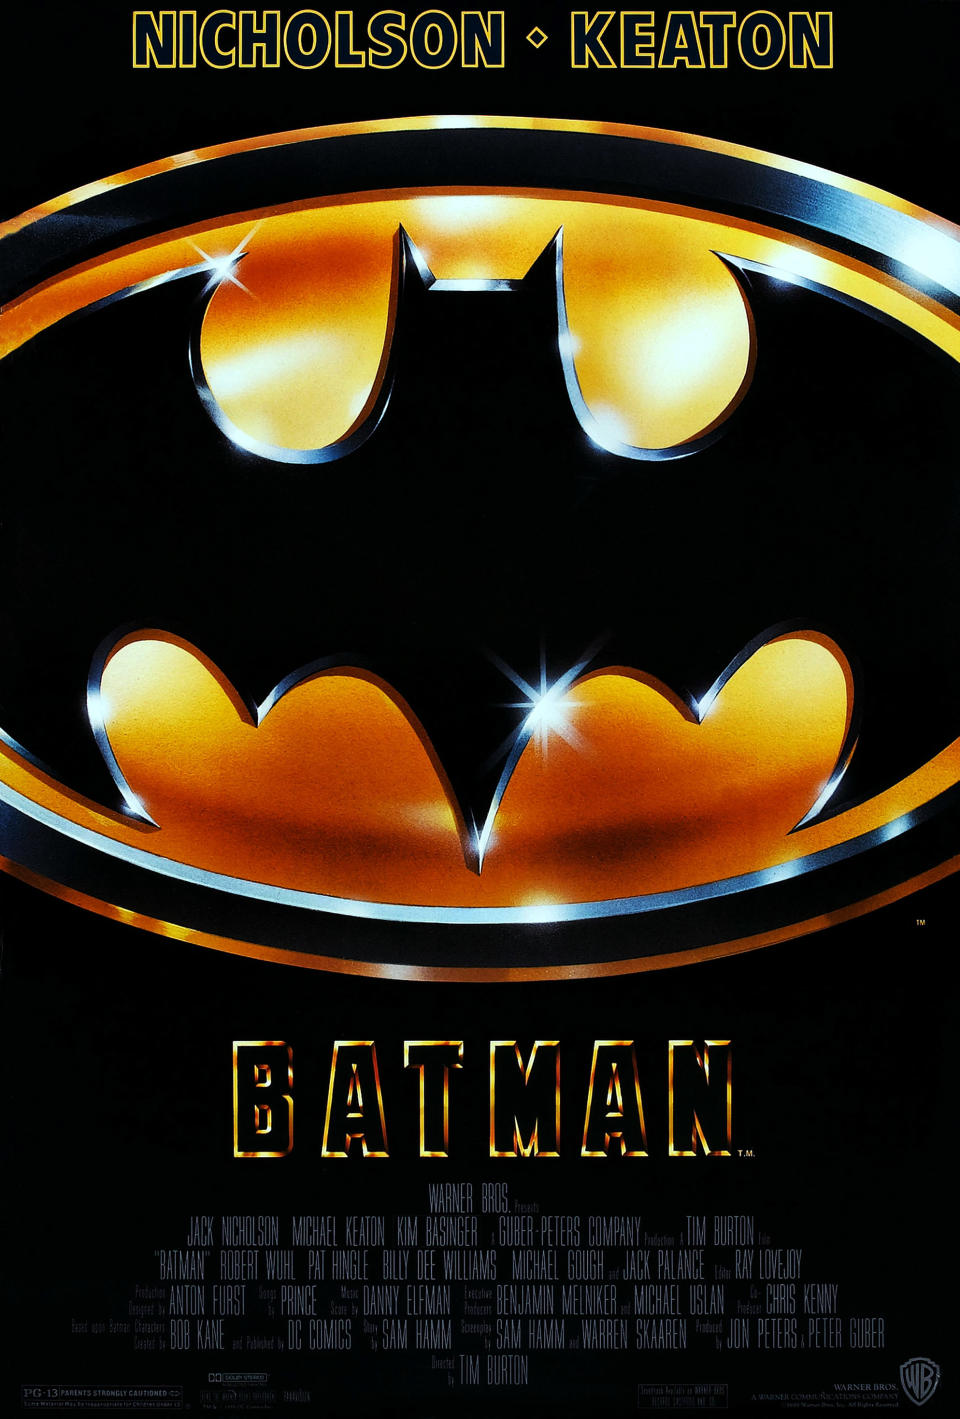 Batman movie poster featuring the iconic bat symbol with "Nicholson" and "Keaton" at the top, and cast names, including Michael Keaton and Jack Nicholson, at the bottom